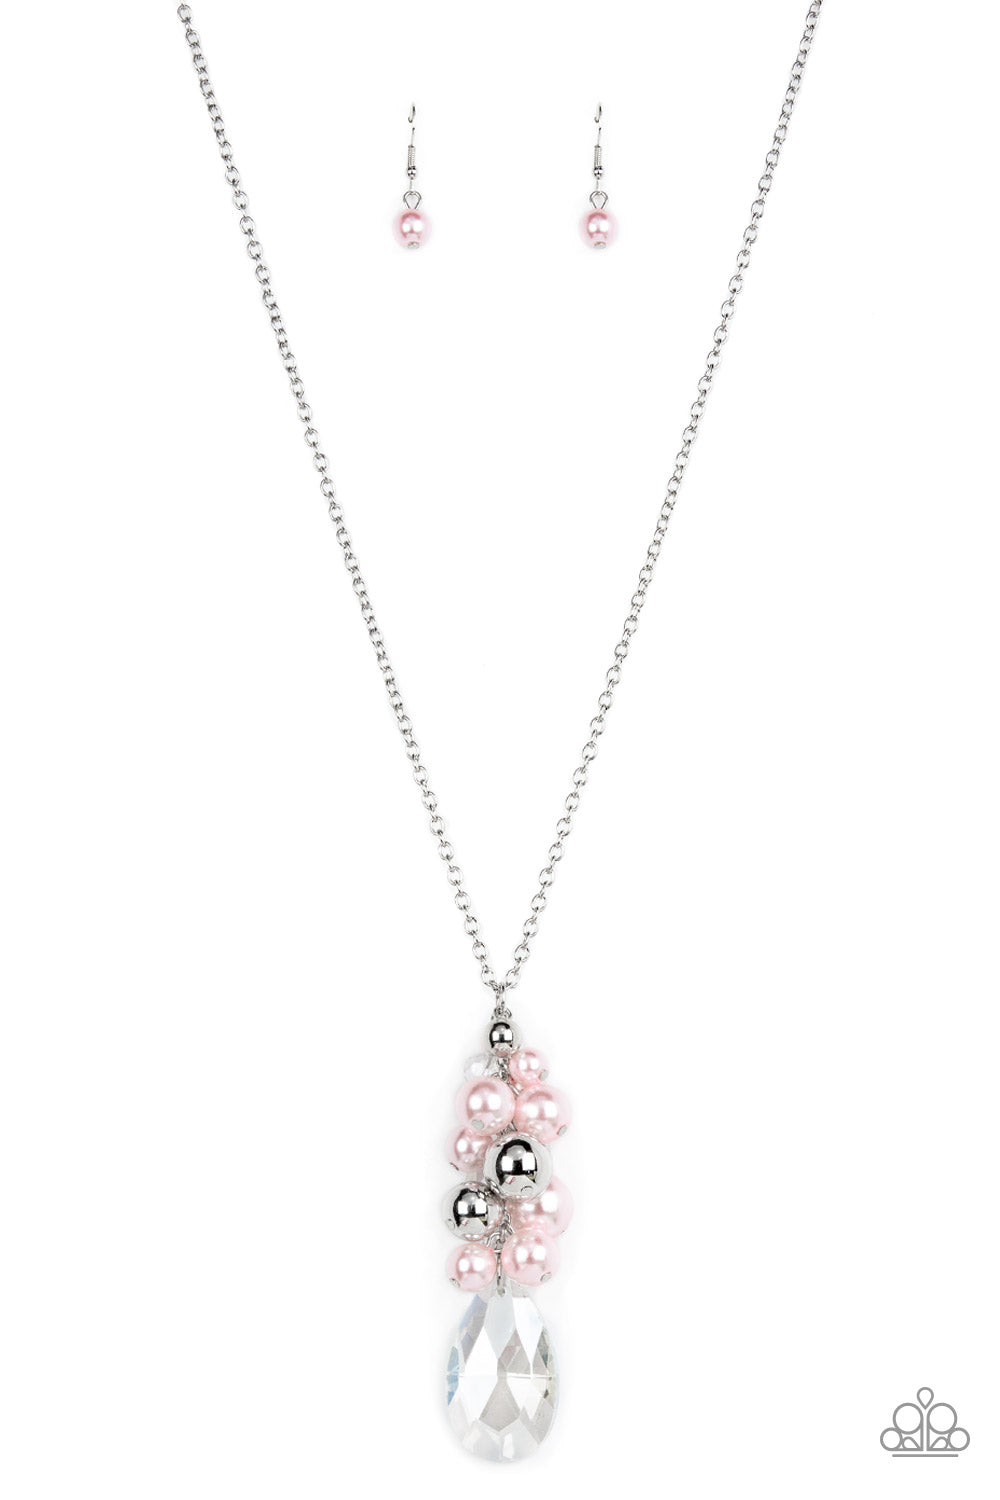 Featuring an iridescent shimmer, a dramatically oversized crystal-like teardrop swings from the bottom of a cluster of shiny silver, pearly white, and crystal-like beads, creating a dazzling pendant at the bottom of a lengthened silver chain. Features an adjustable clasp closure.